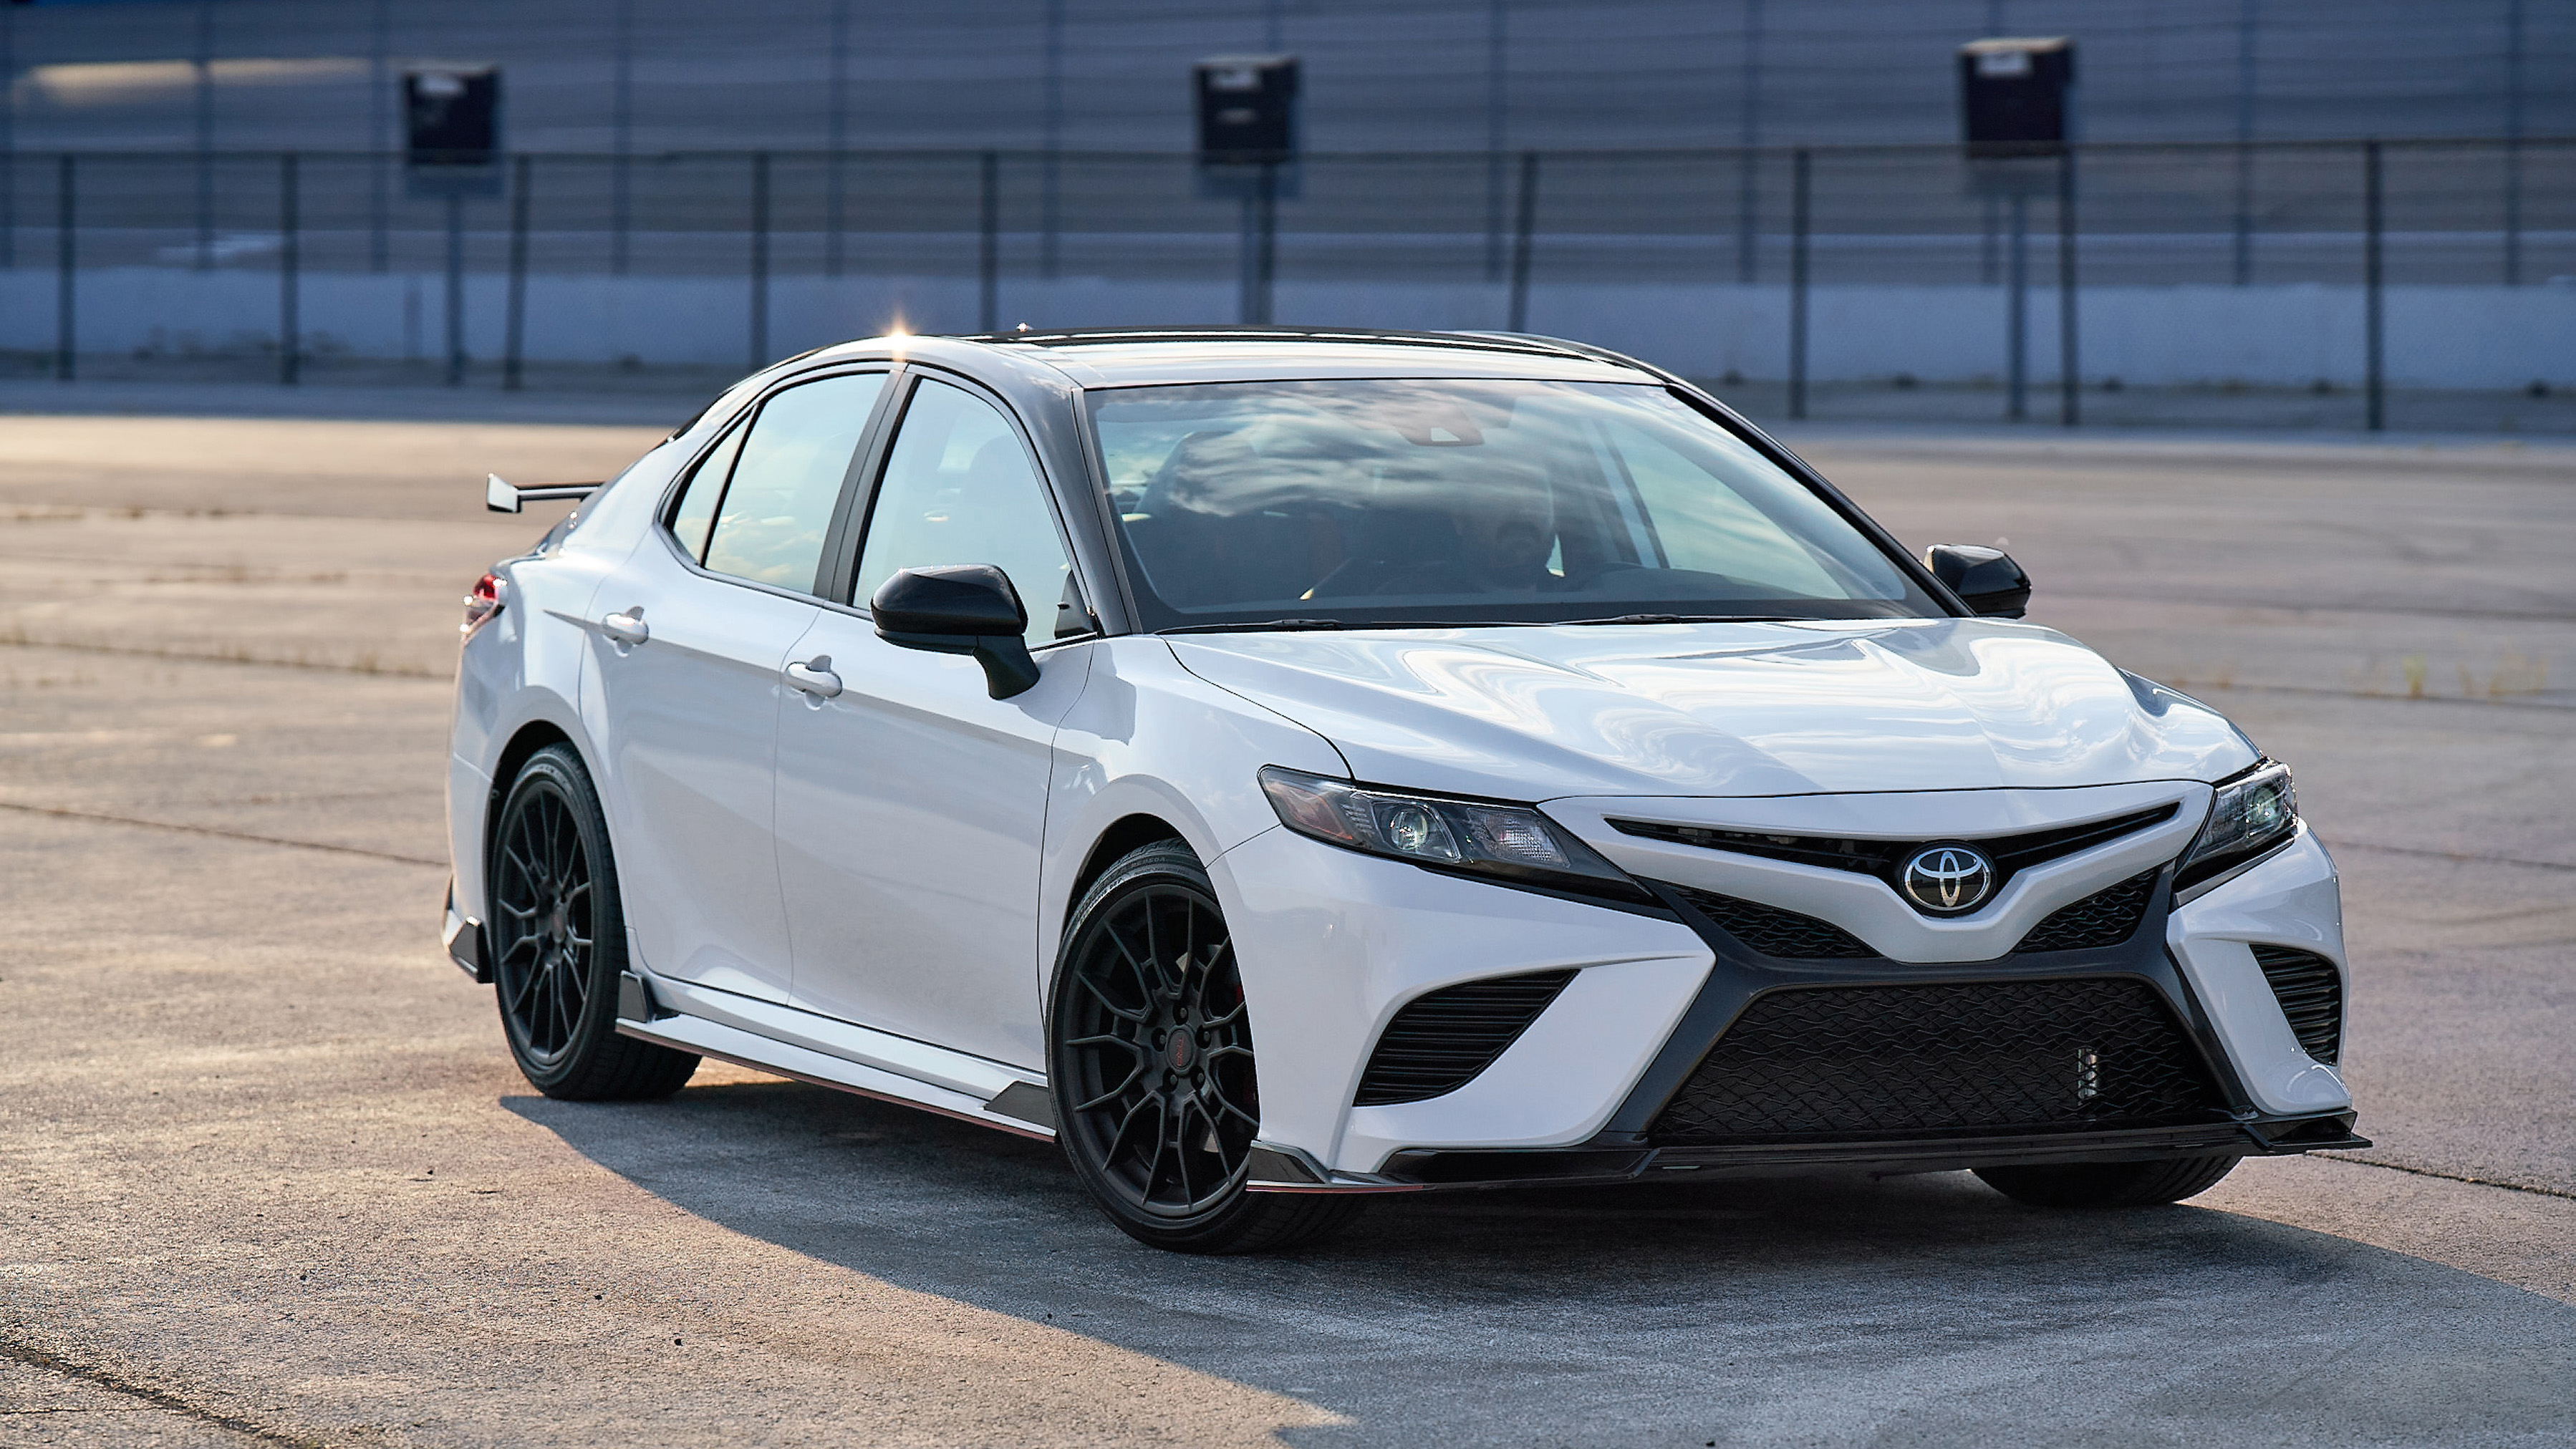 2020 Toyota Camry Trd Drivers Notes Handling Design Specs